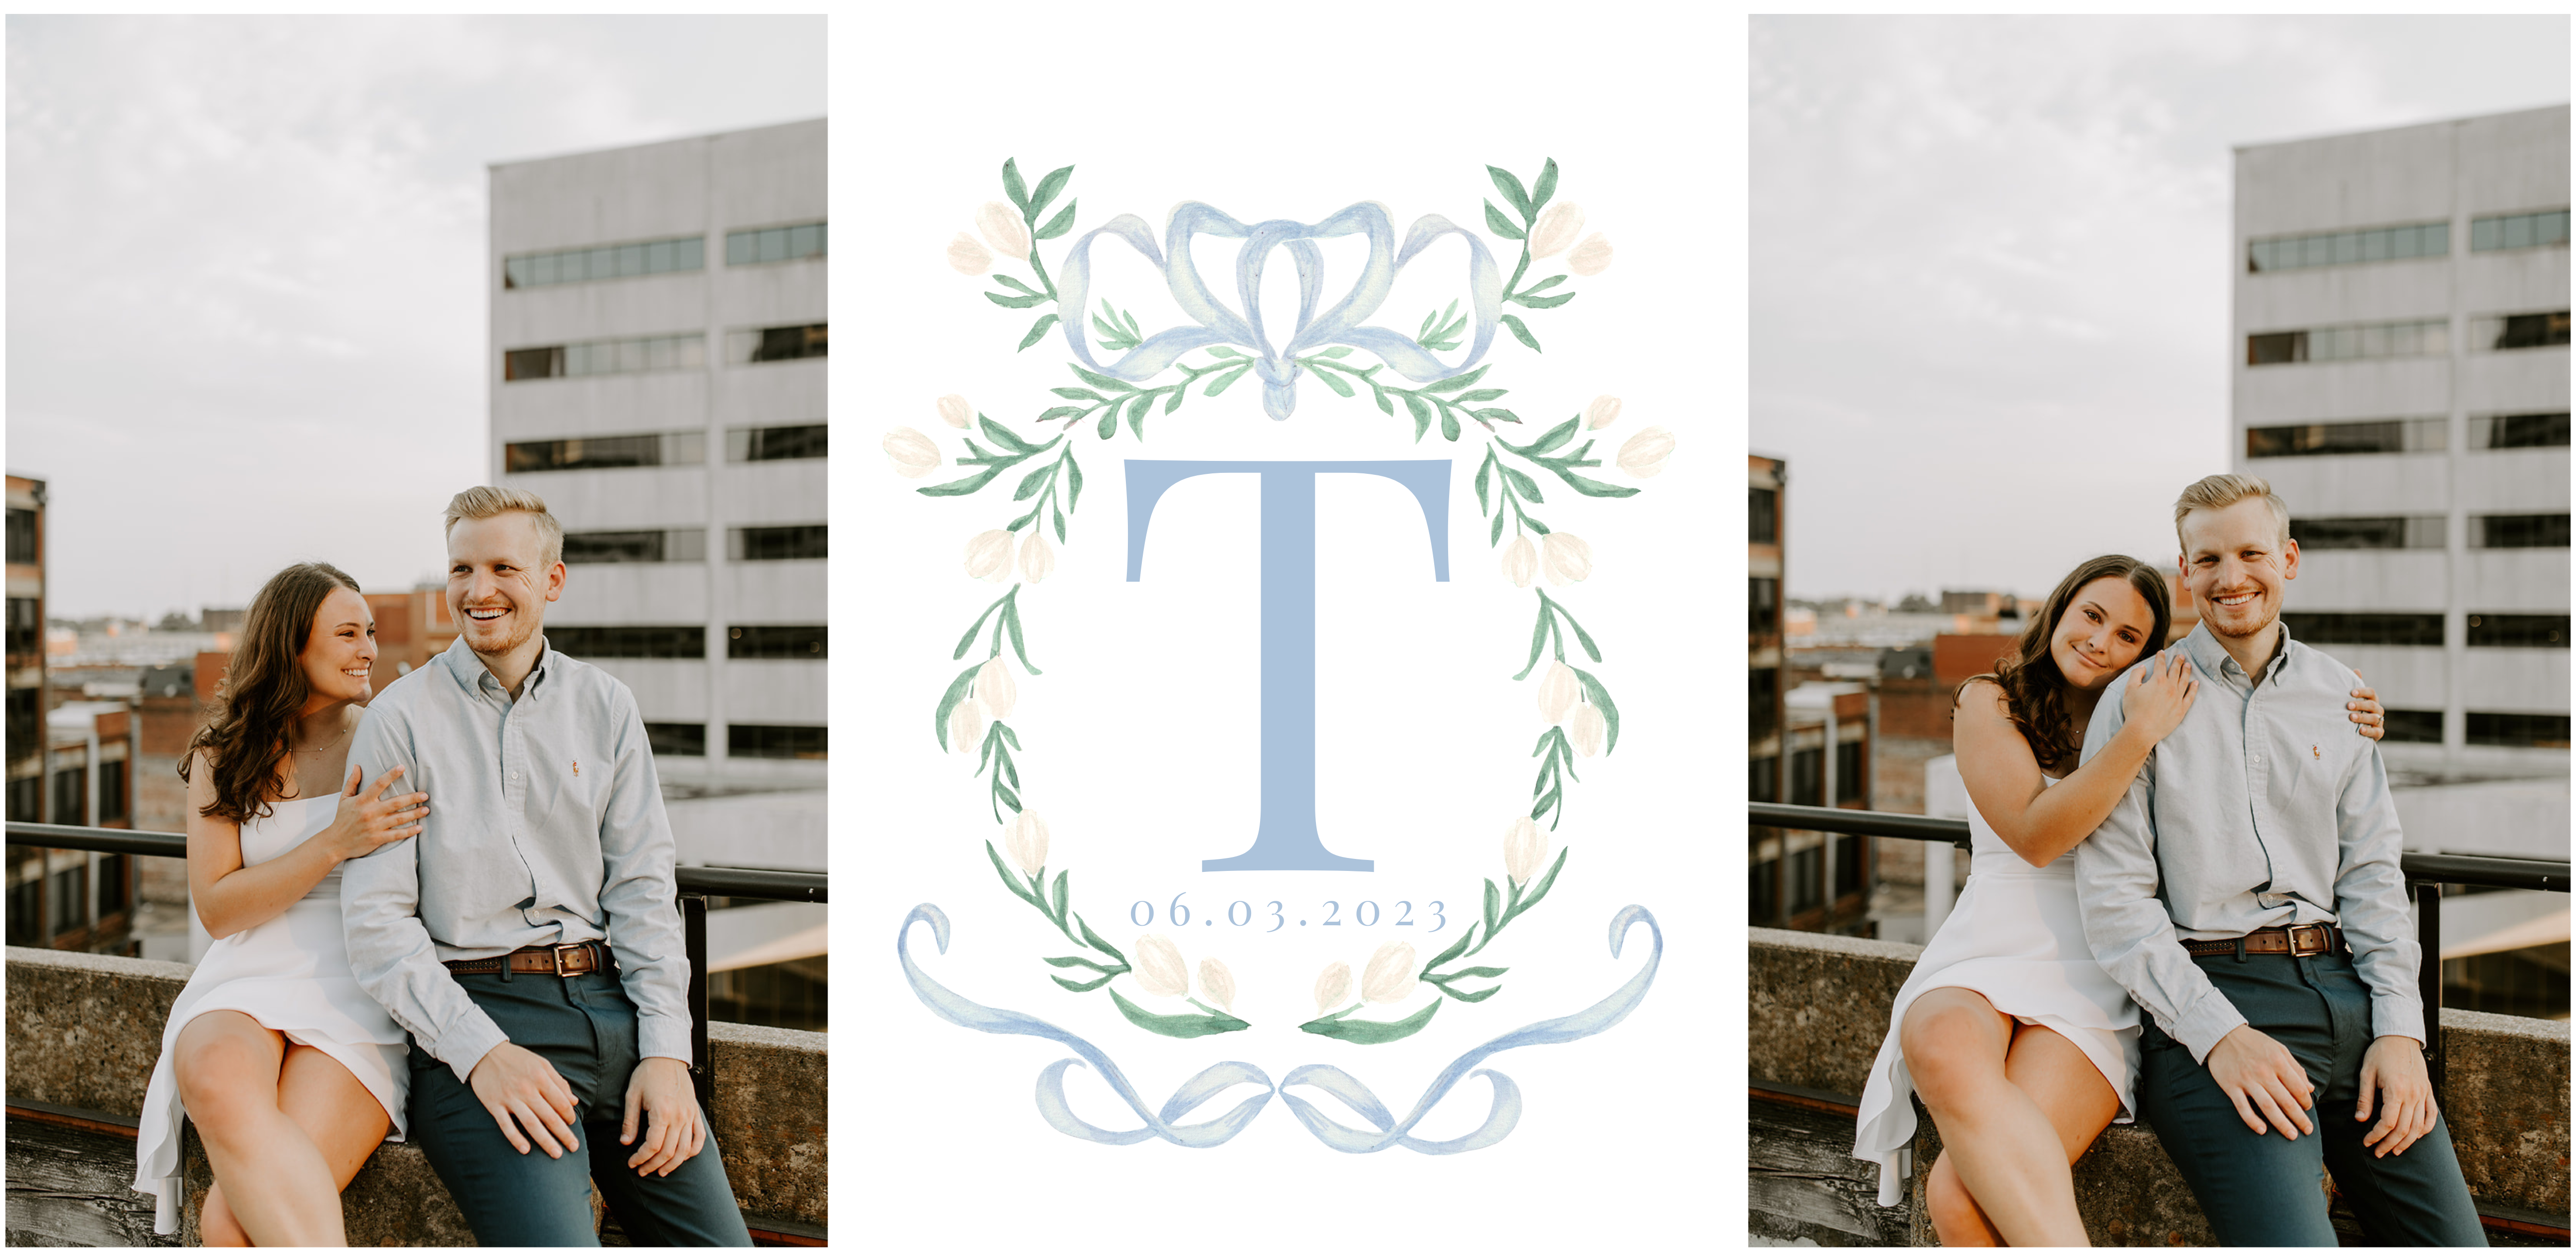 The Wedding Website of Lori Bandy and Kyle Tyson